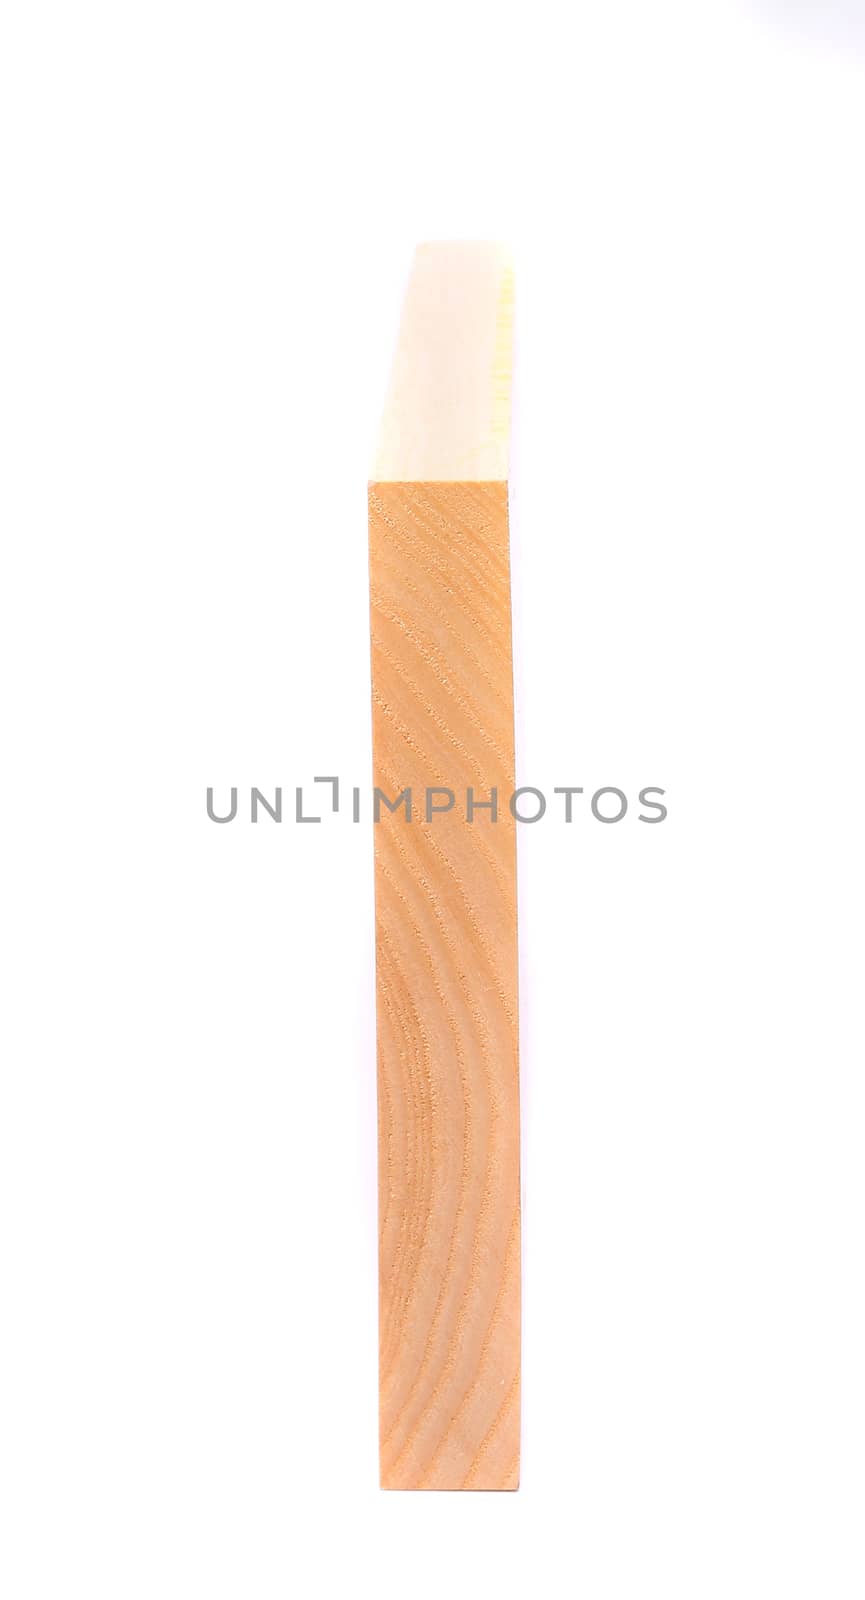 Close up view of wooden plank by indigolotos